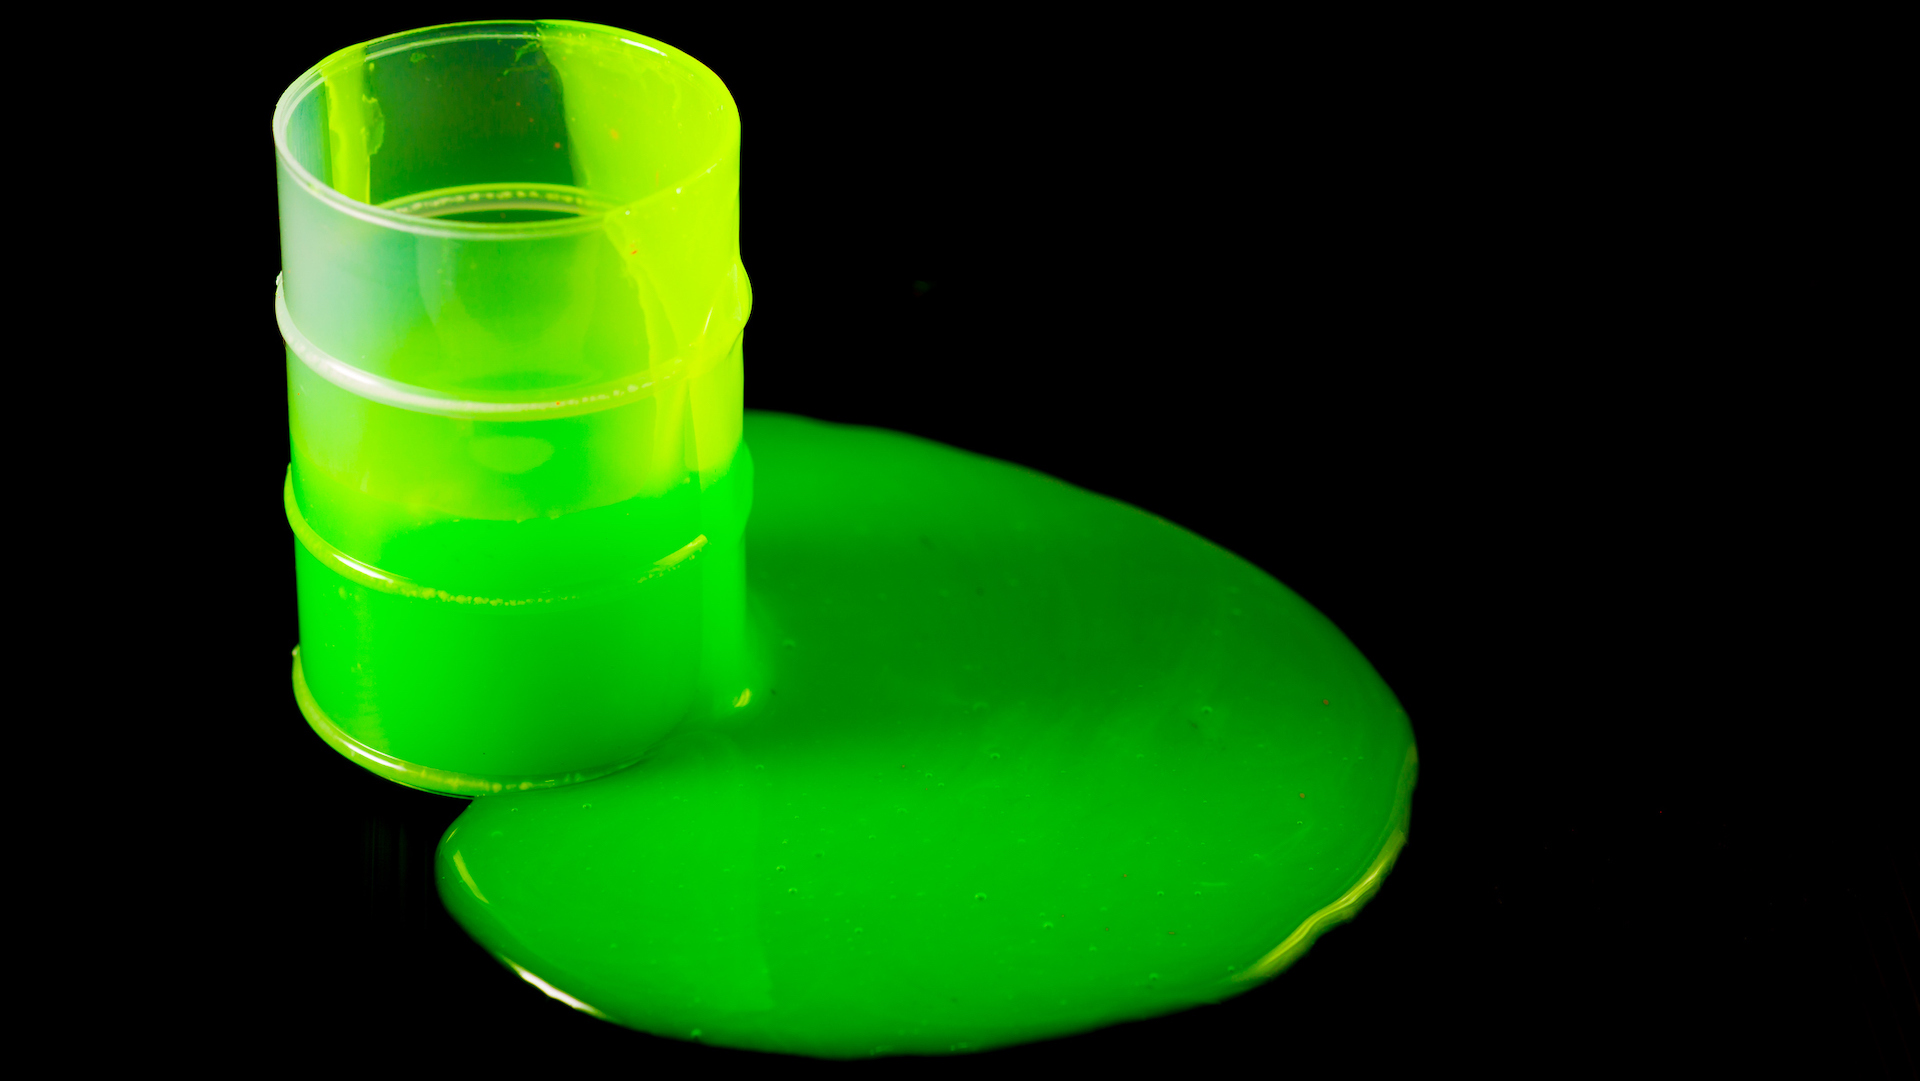 A plastic barrel with green slime oozing out onto the floor